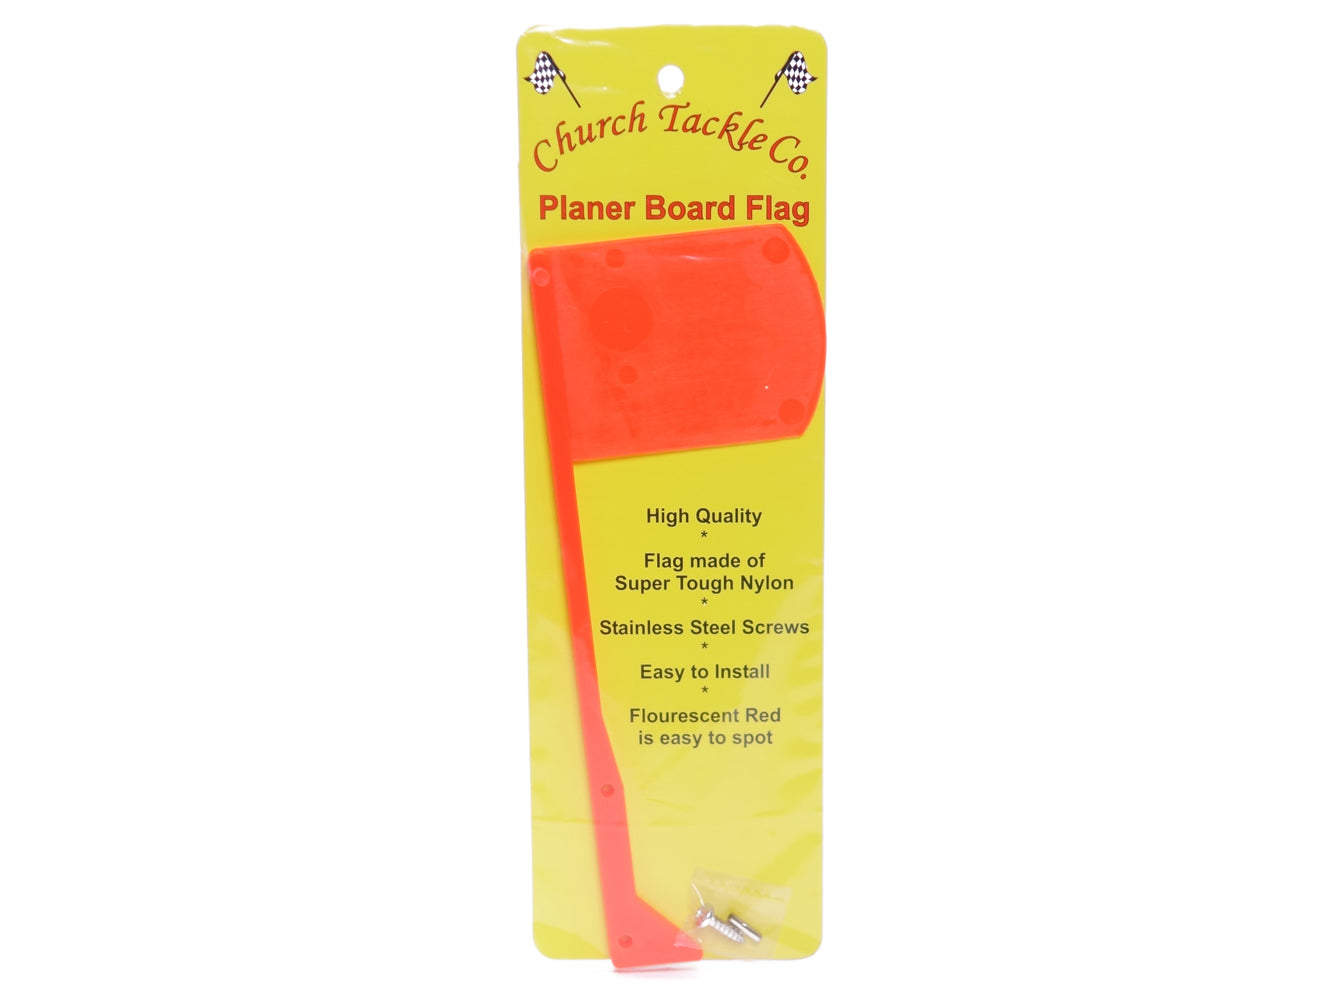 Replacement Planer Board Flag 60112